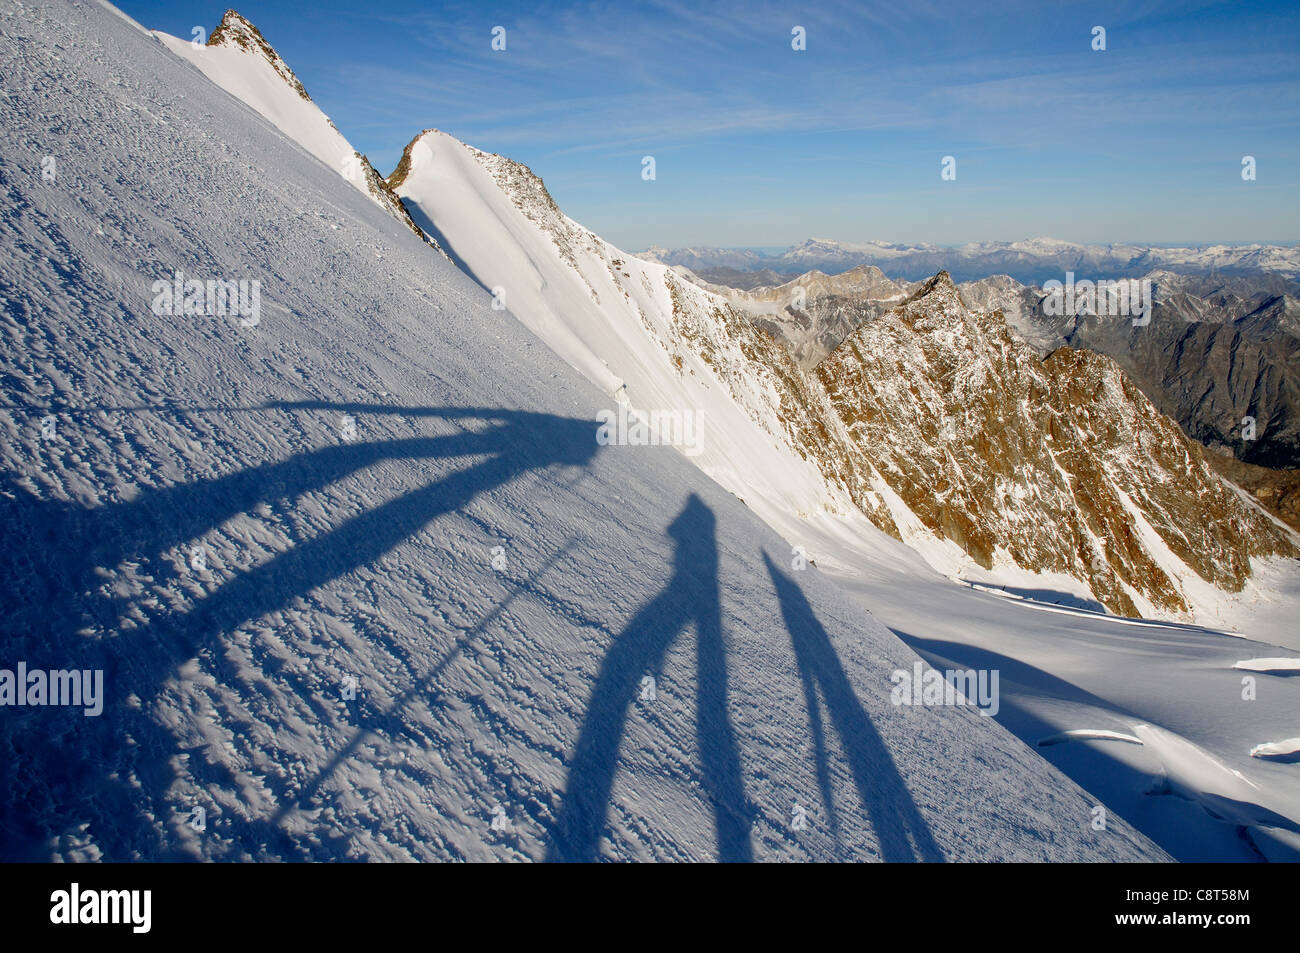 Shadows of three climbers on the south ridge of the Nadelhorn in the Swiss Alps Stock Photo